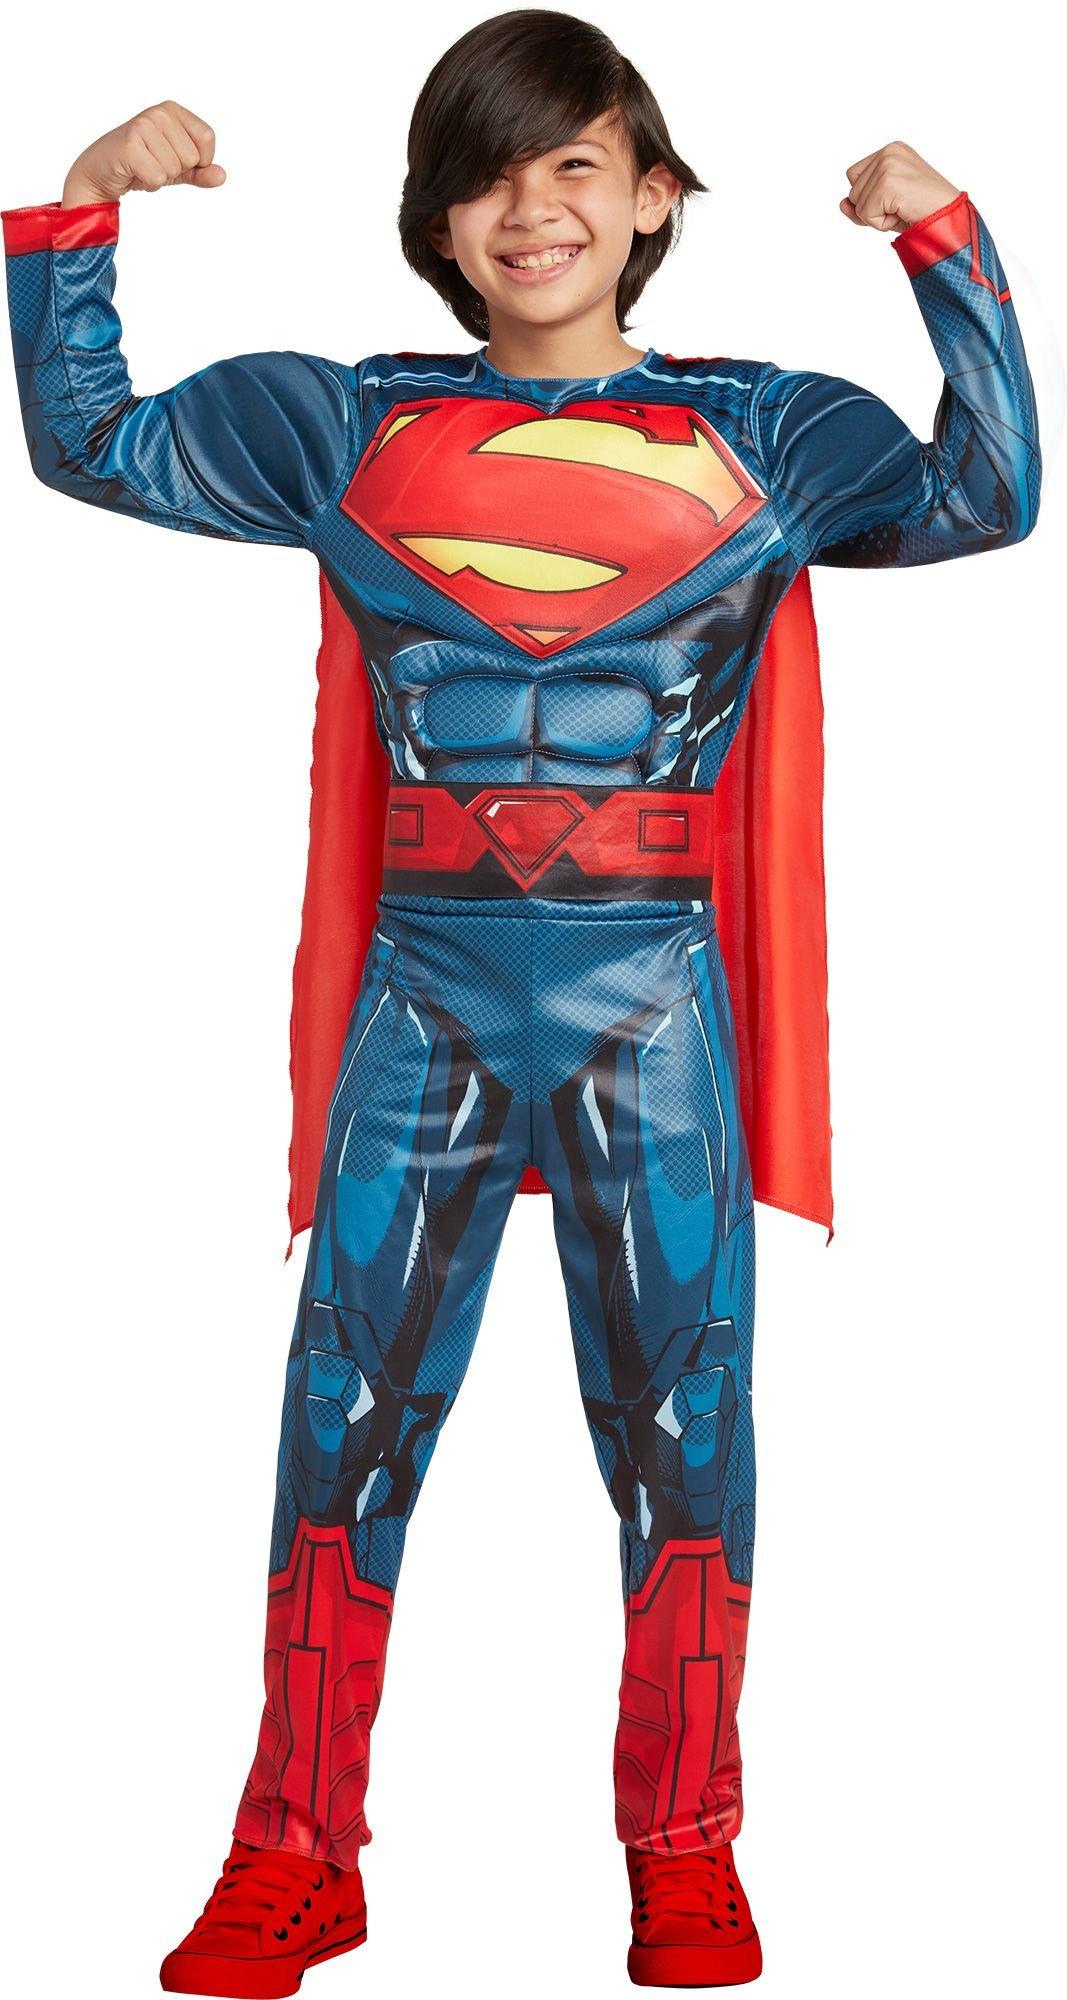 Superman Muscle Costume for Kids - Justice League